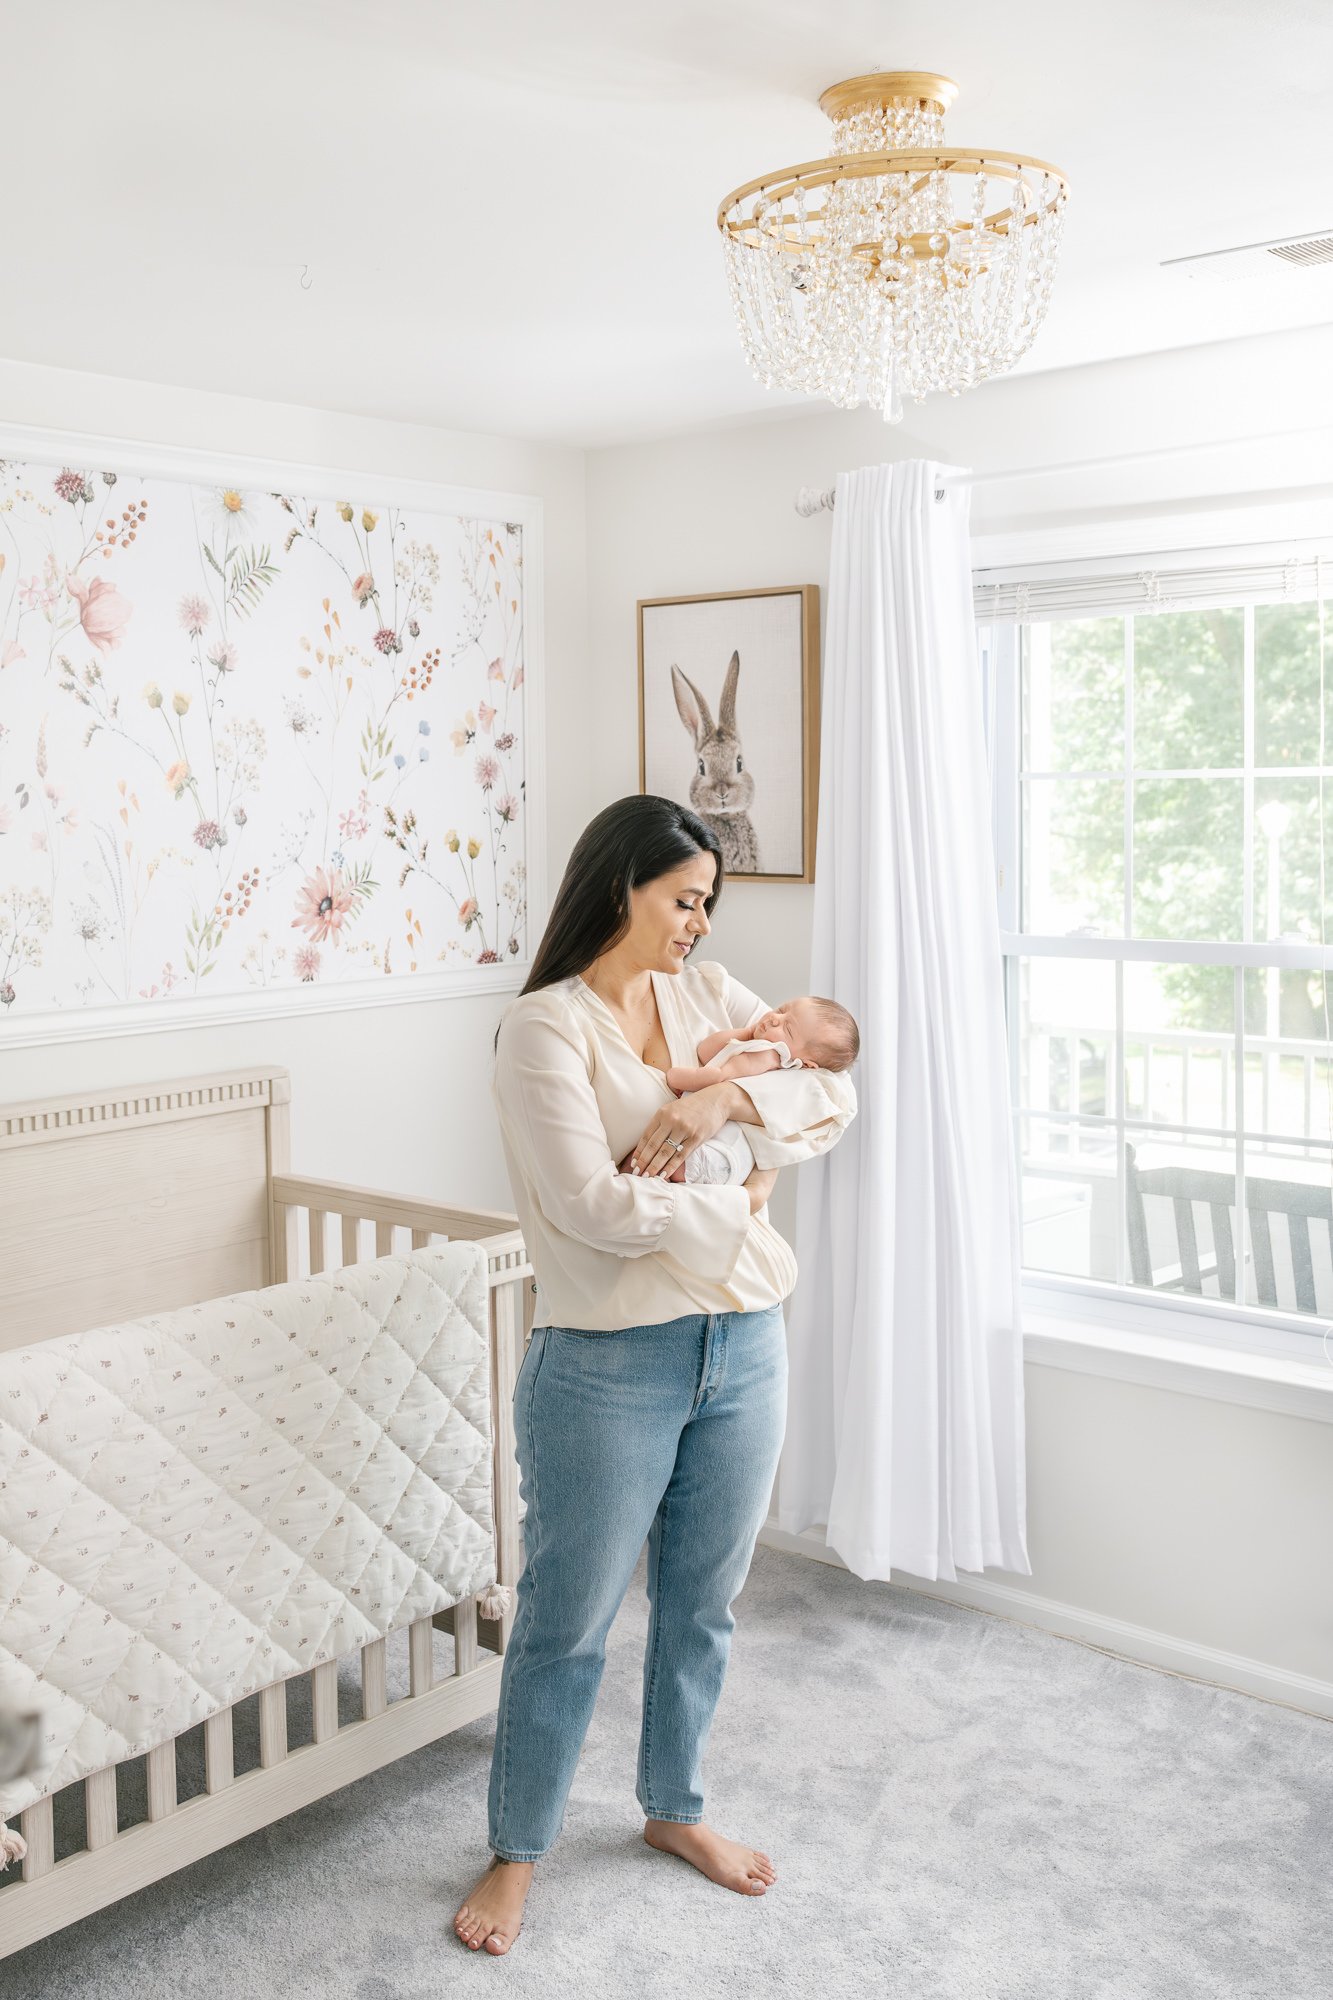  In a luxurious nursery adorned with timeless floral wallpaper, a young mother cradles her newborn. Nicole Hawkins Photography beautifully captures this intimate in-home newborn portrait session. #centralNewJerseyphotographer #inhomeportraits #newbor